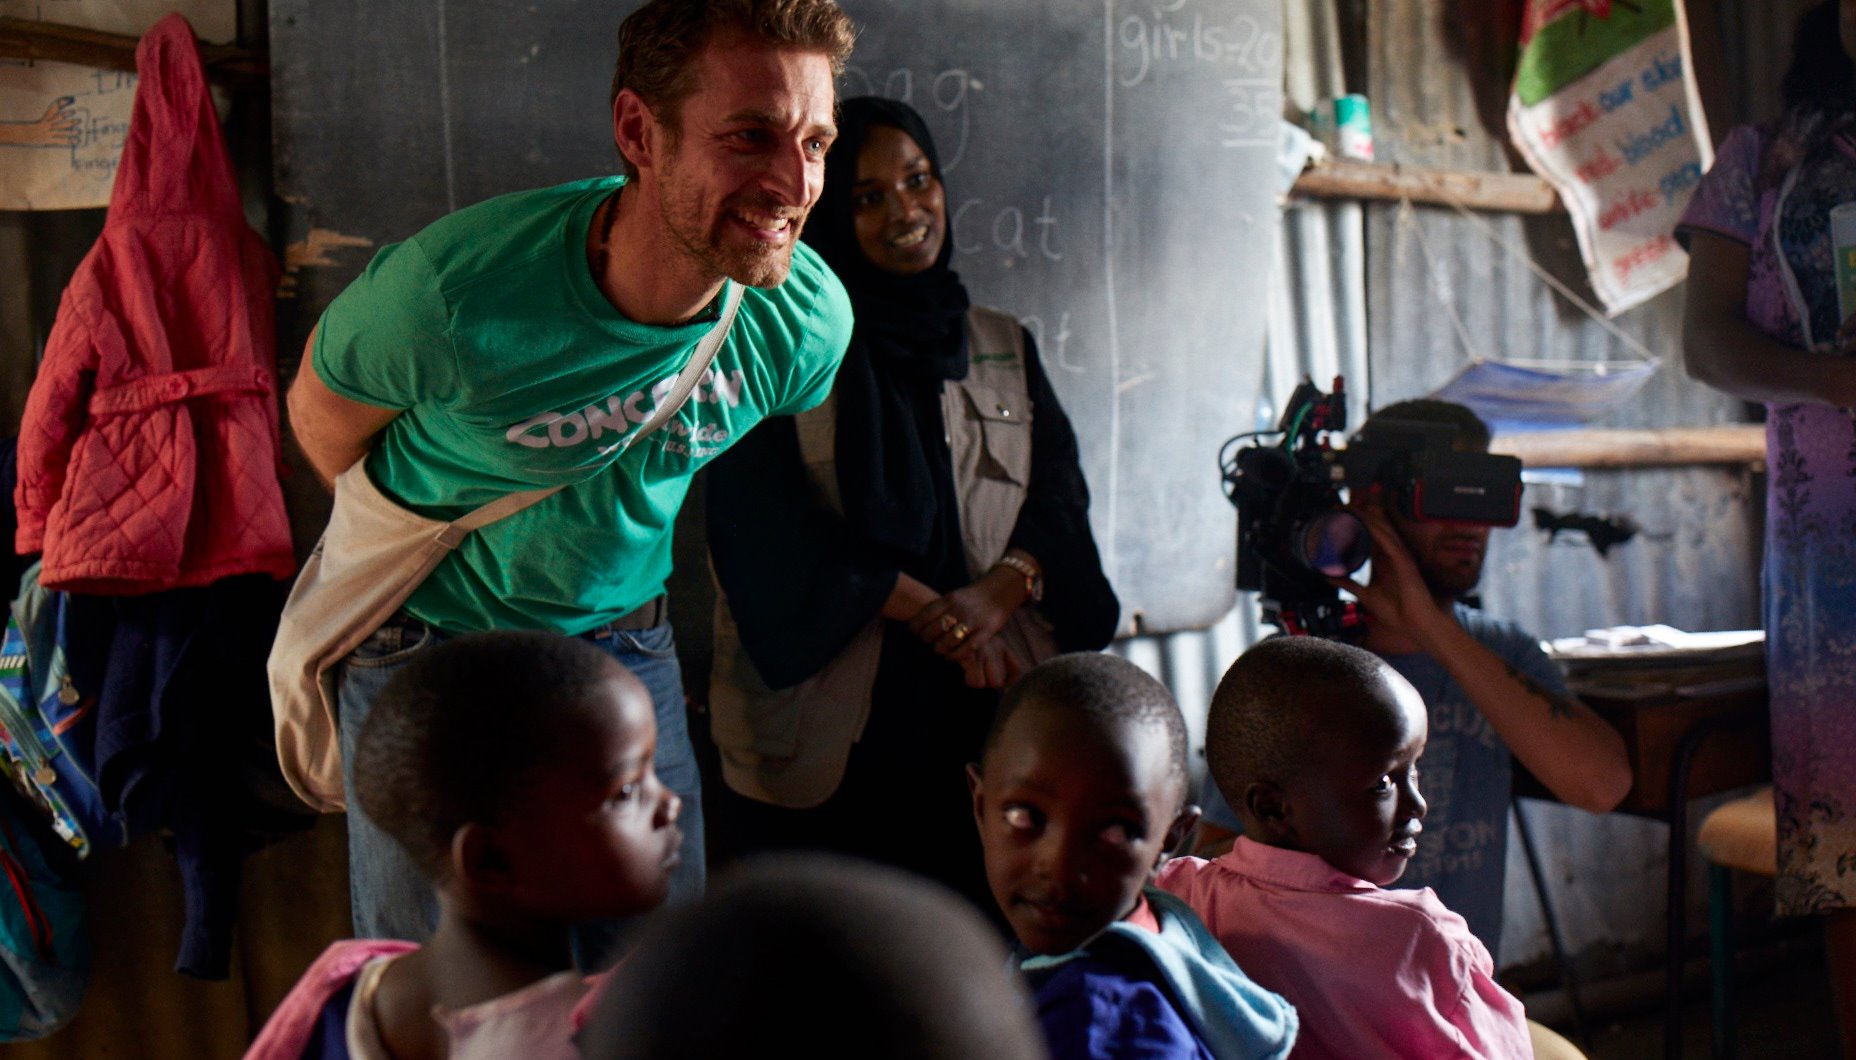 Read Alexi Lubomirski: Field notes on a Journey to Kenya by Concern Worldwide